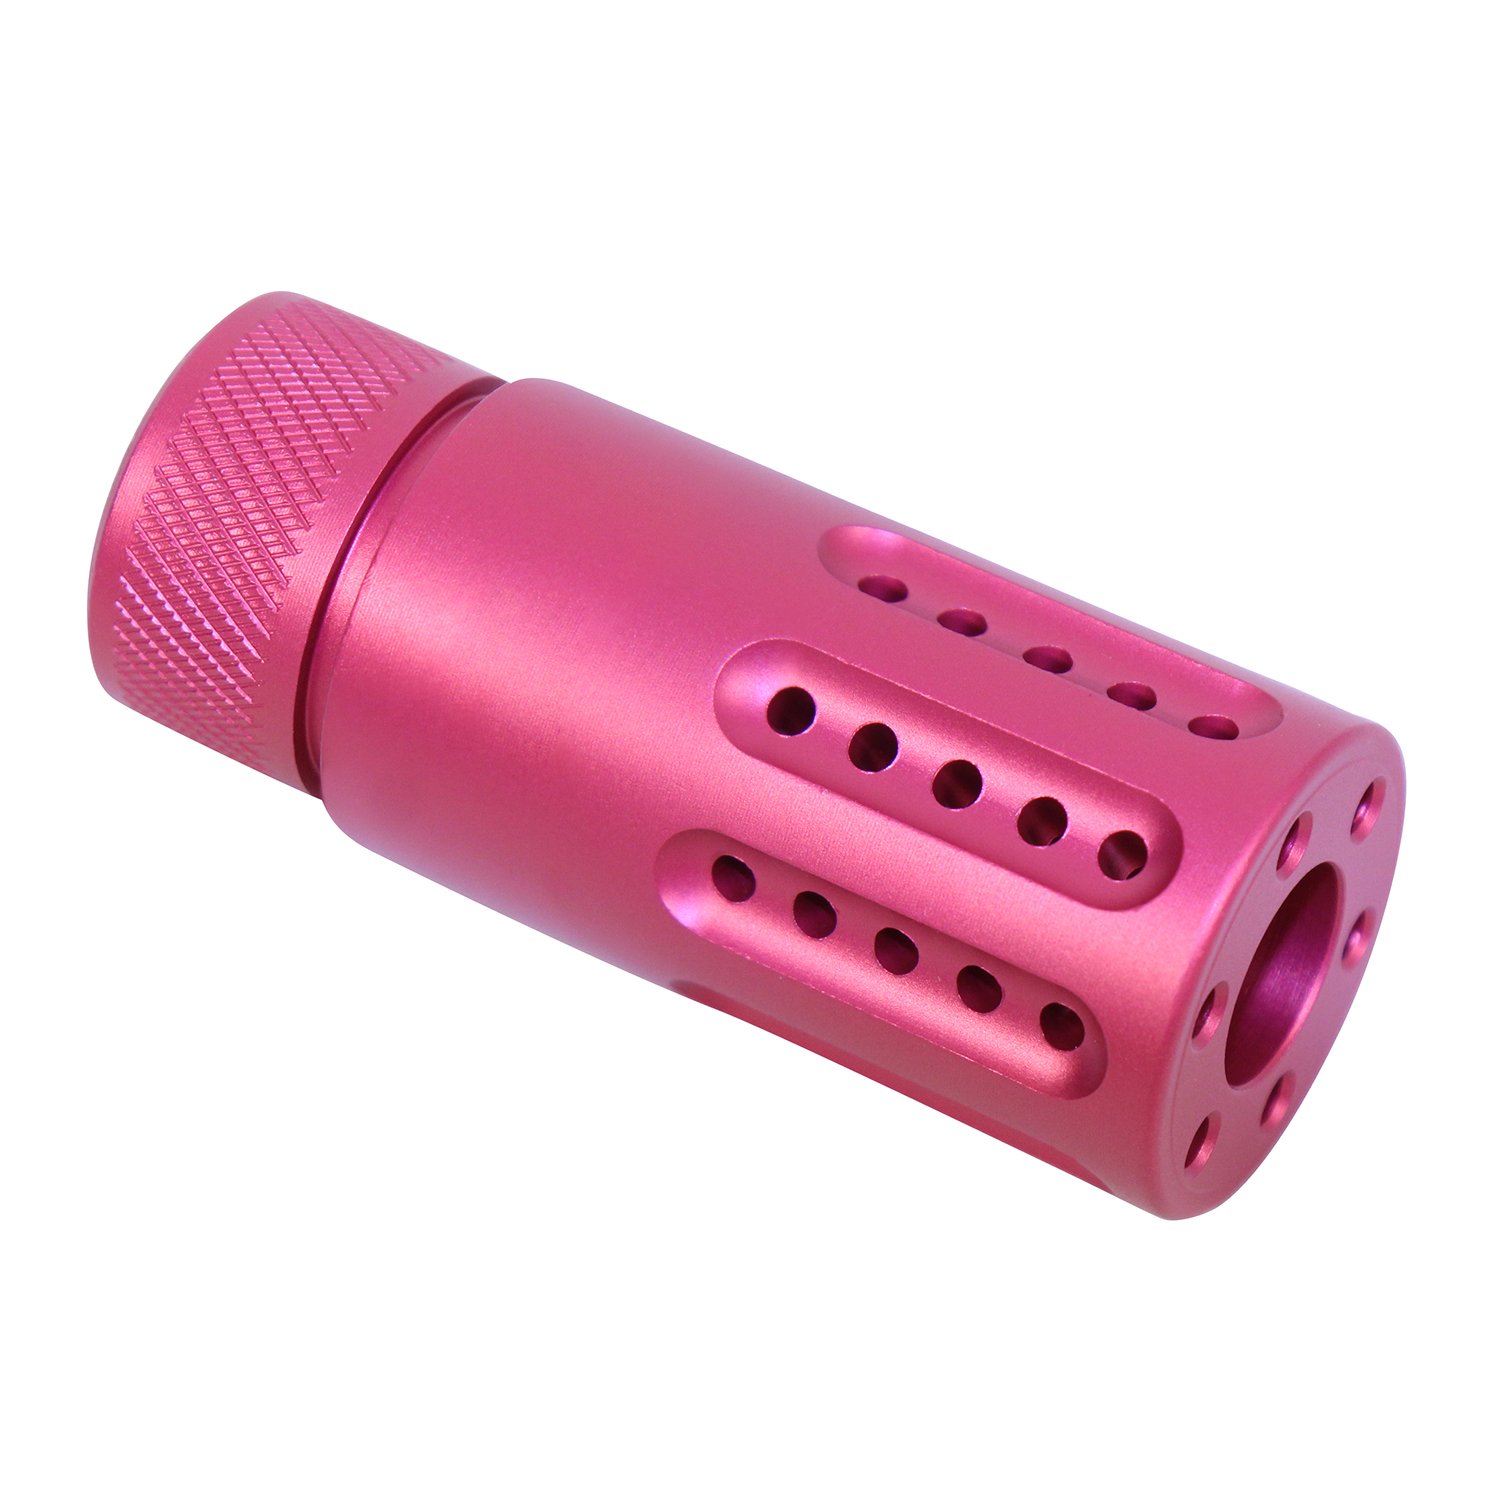 Compact anodized rose AR-15 muzzle brake with slip-over barrel shroud